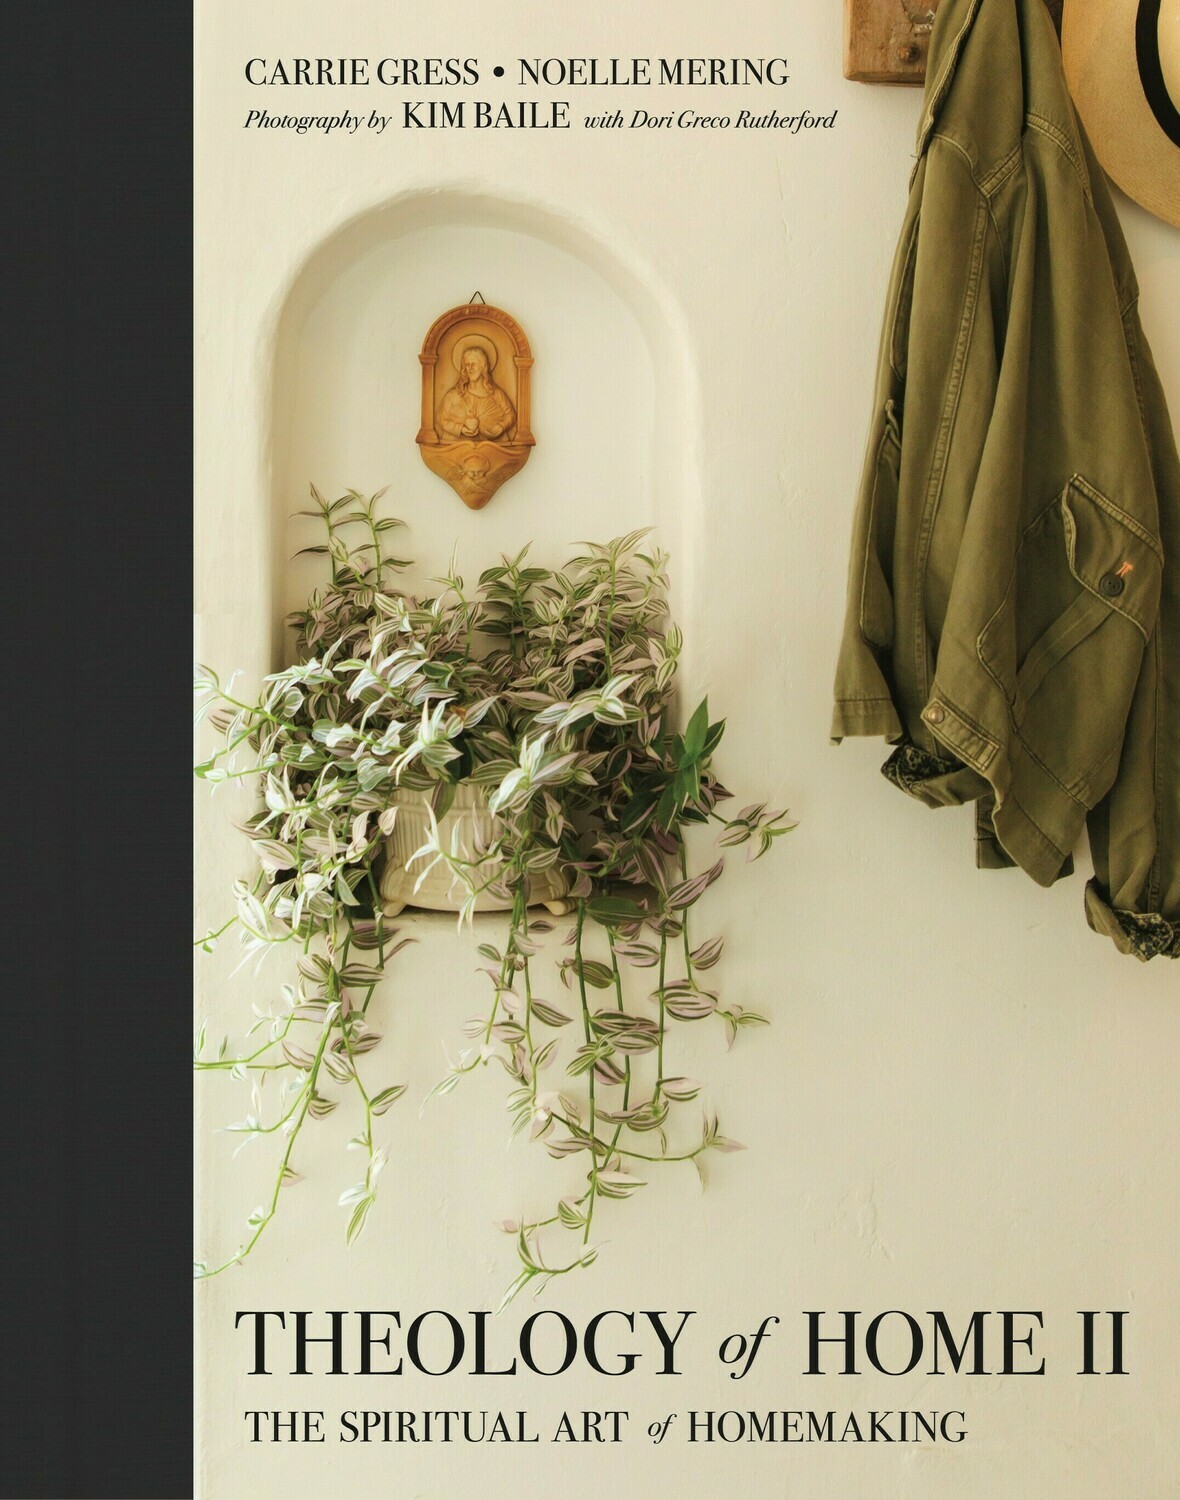 Theology of Home II: The Art of Spiritual Homemaking by Carrie Gress